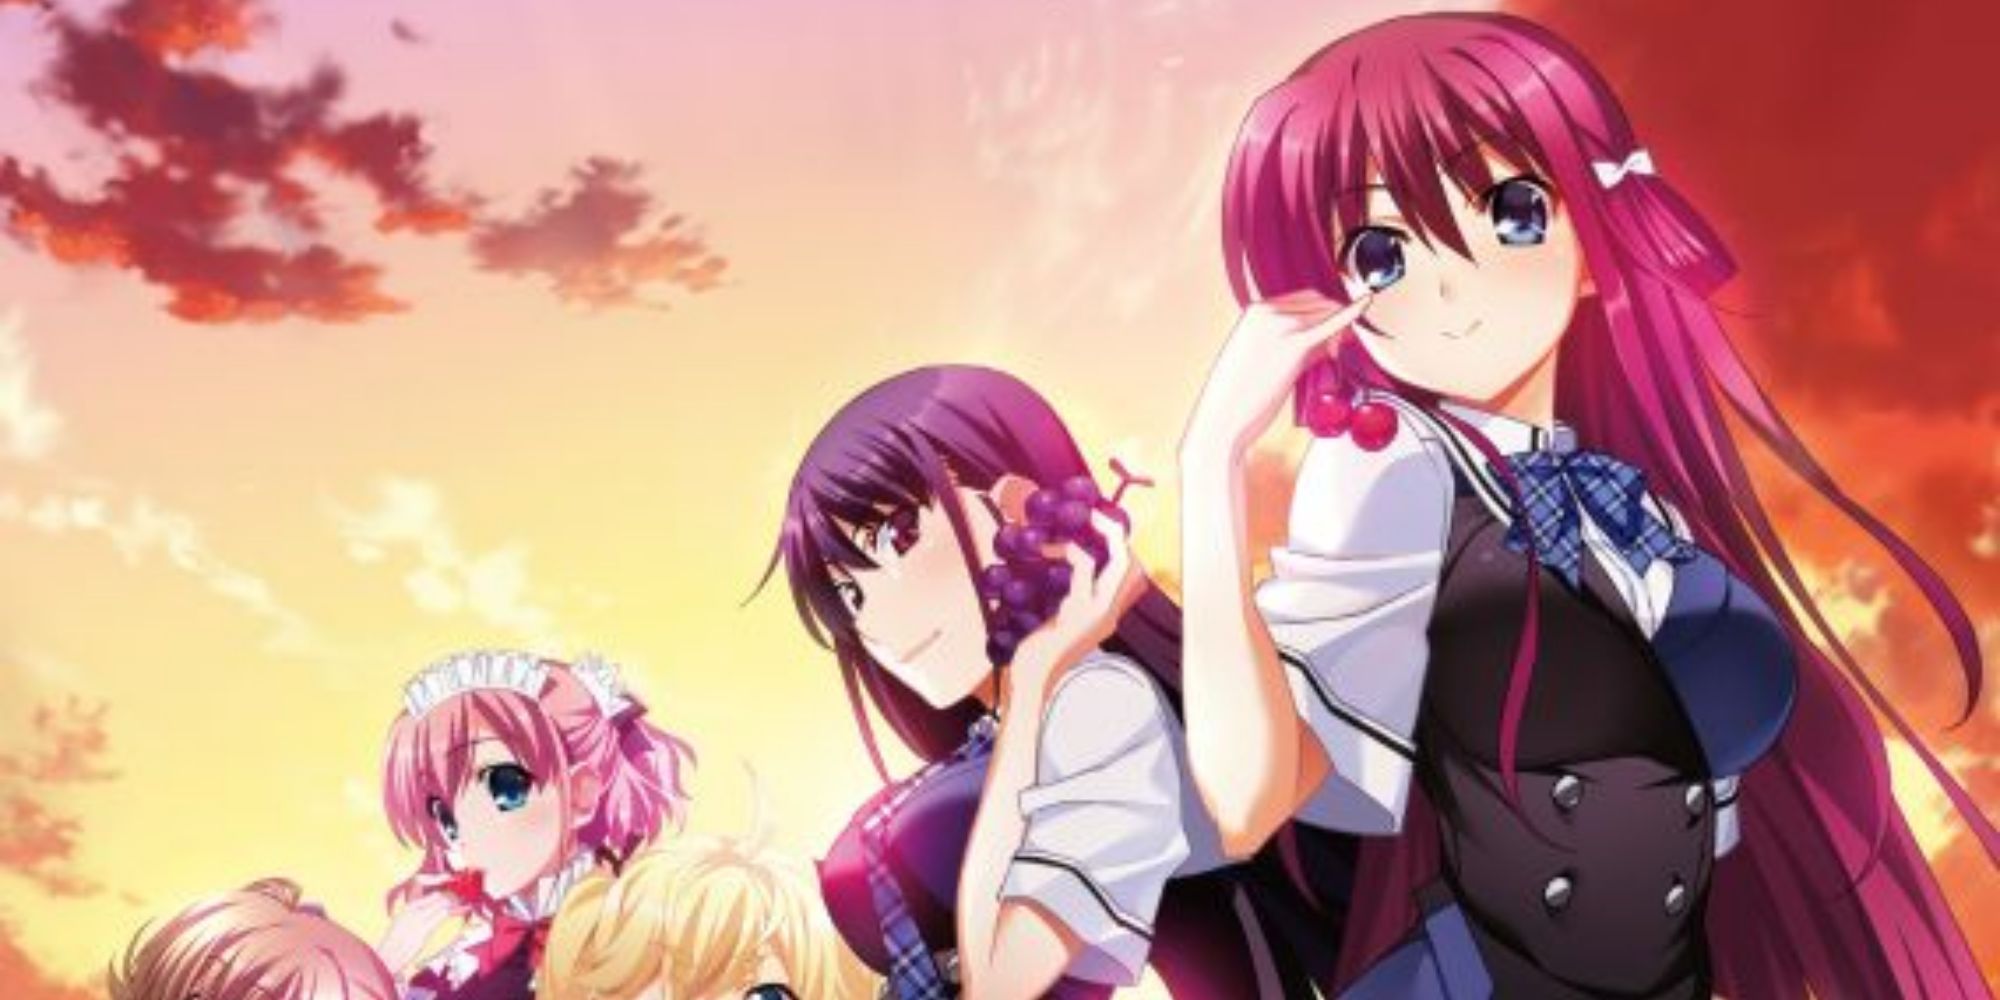 Characters from The Fruit Of Grisaia anime posing at sunset